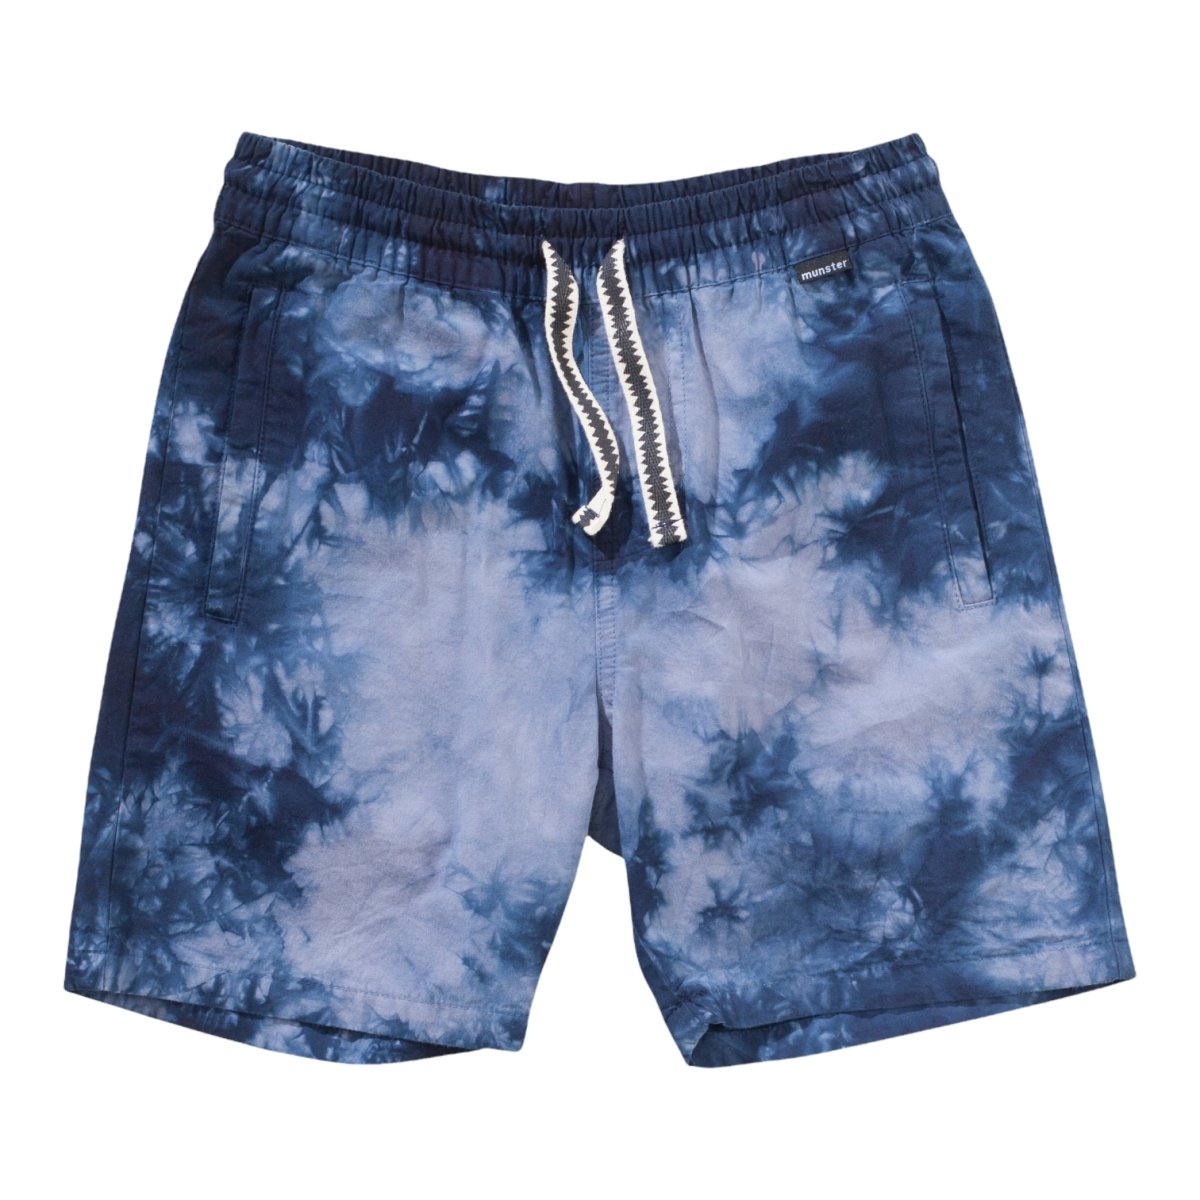 STAINED TIE DYE SHORTS